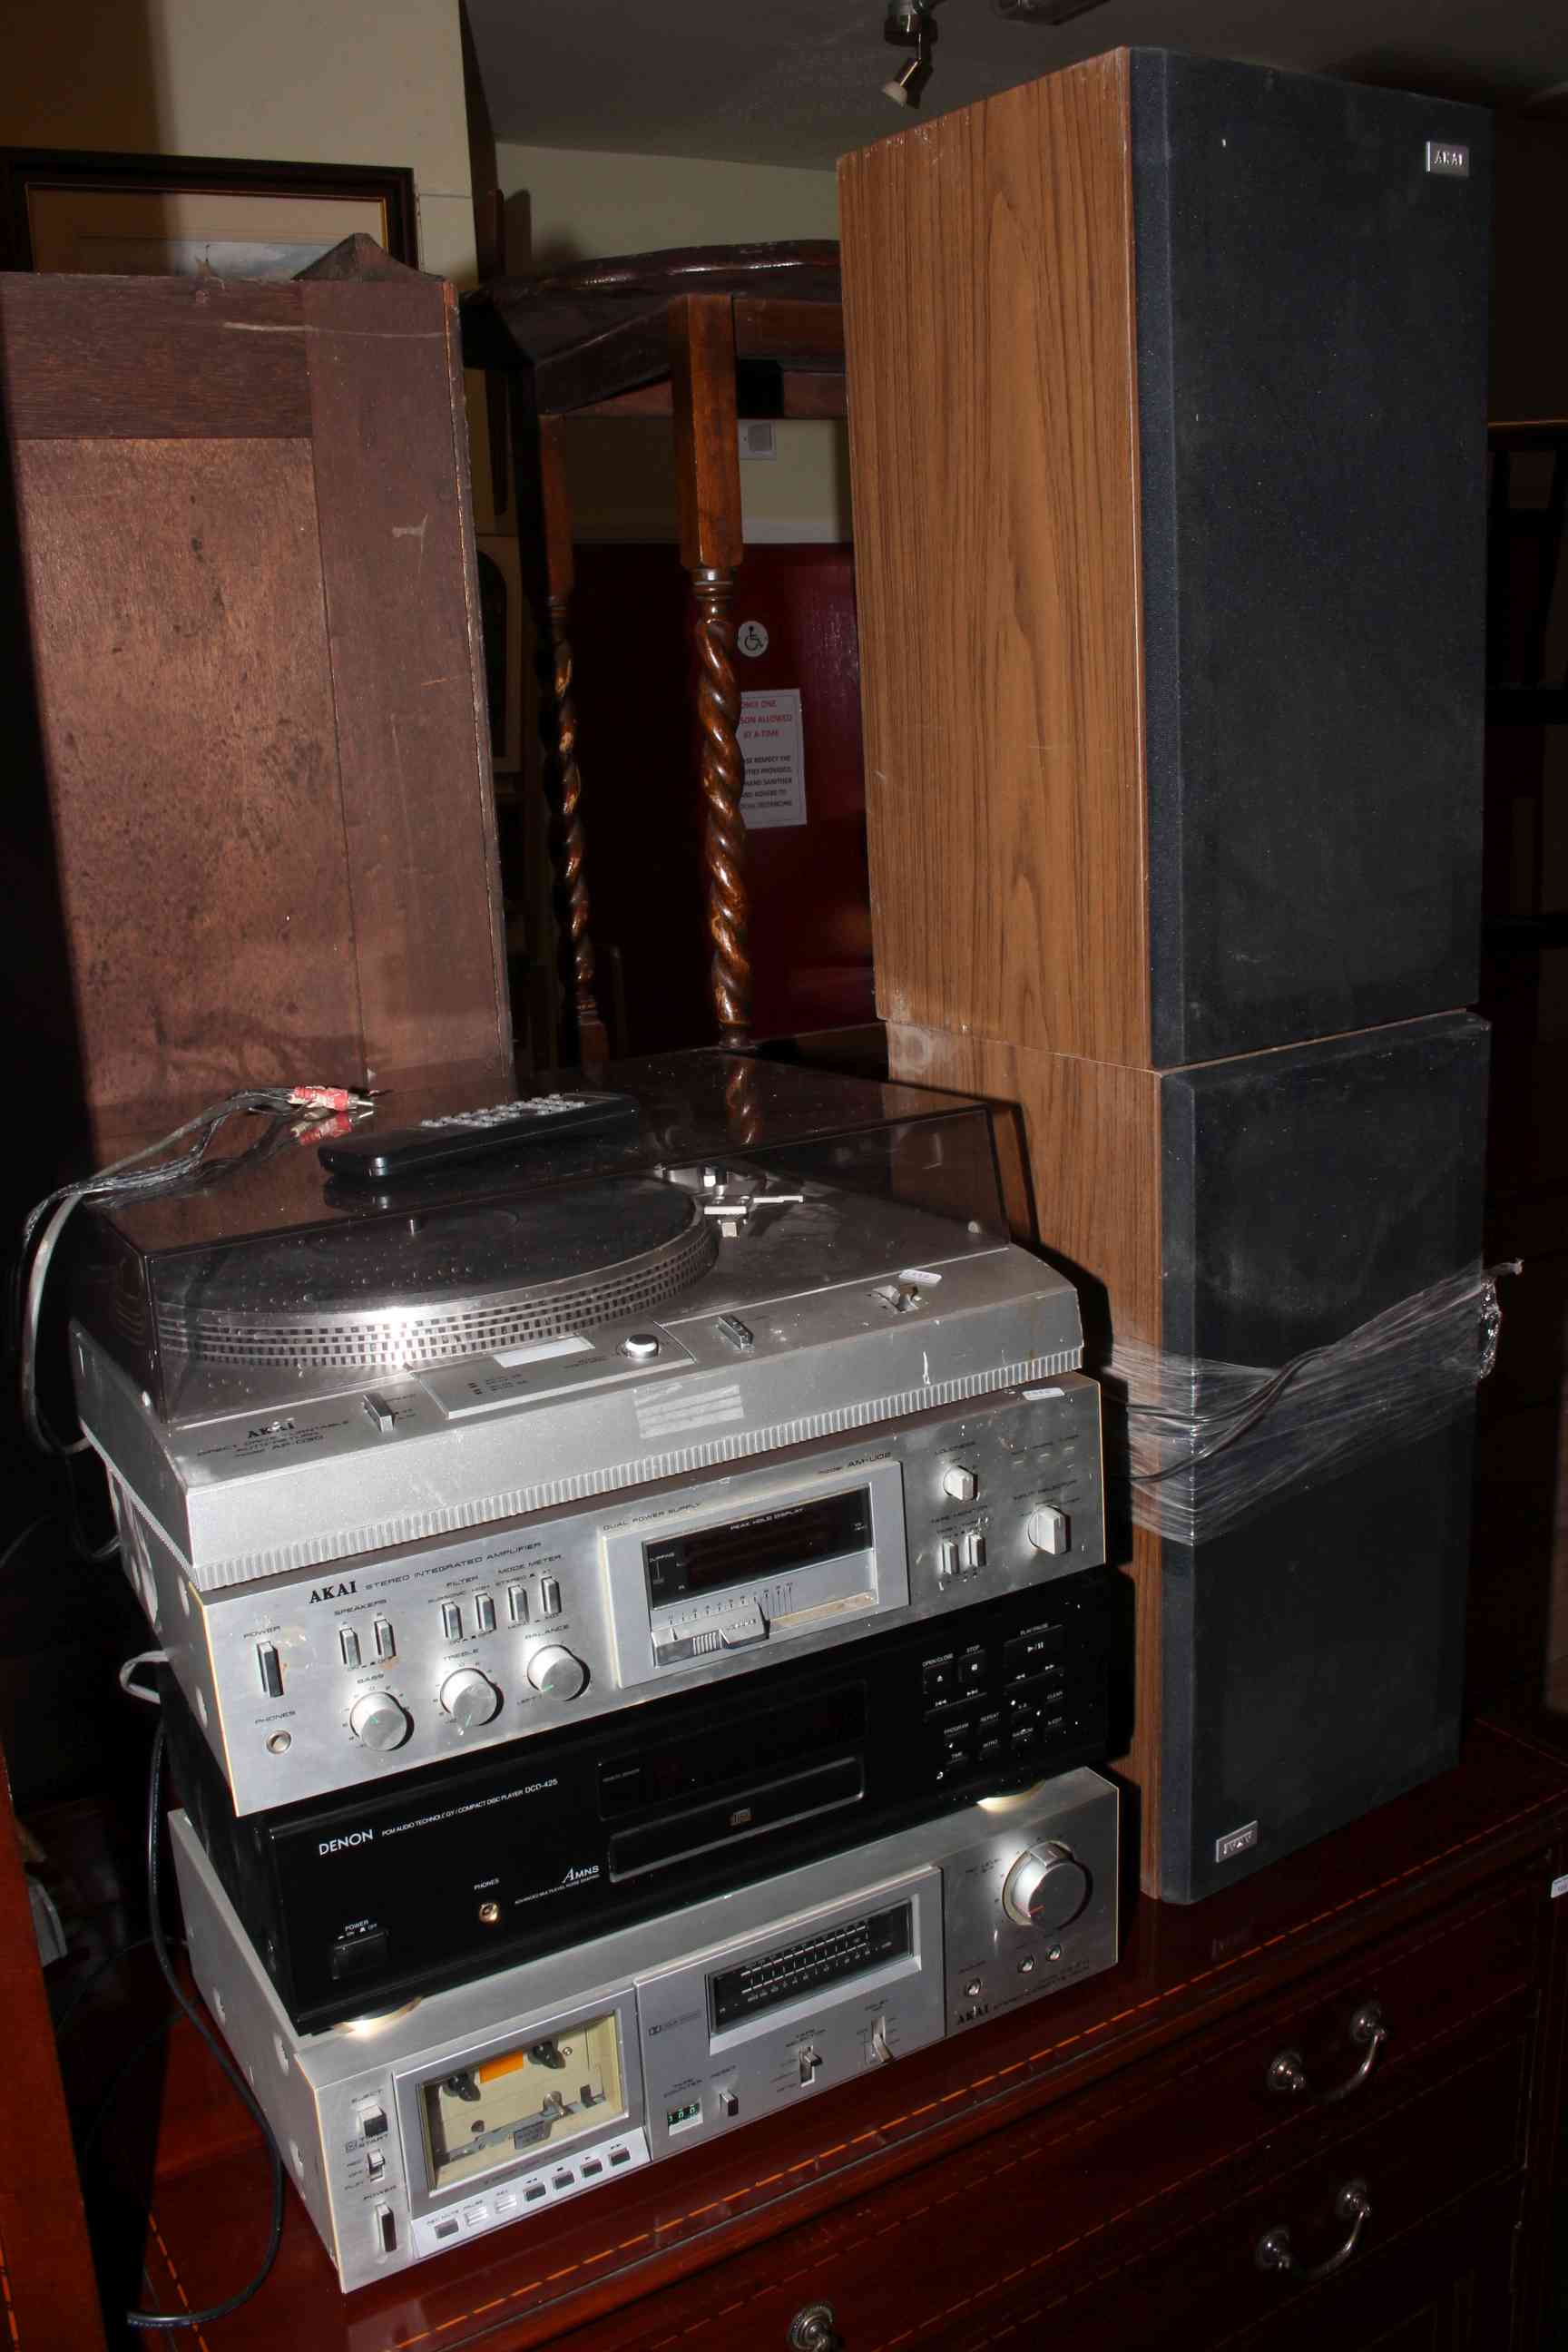 Akai turntable, amplifier, tape deck and two speakers together with Denon compact disc player.